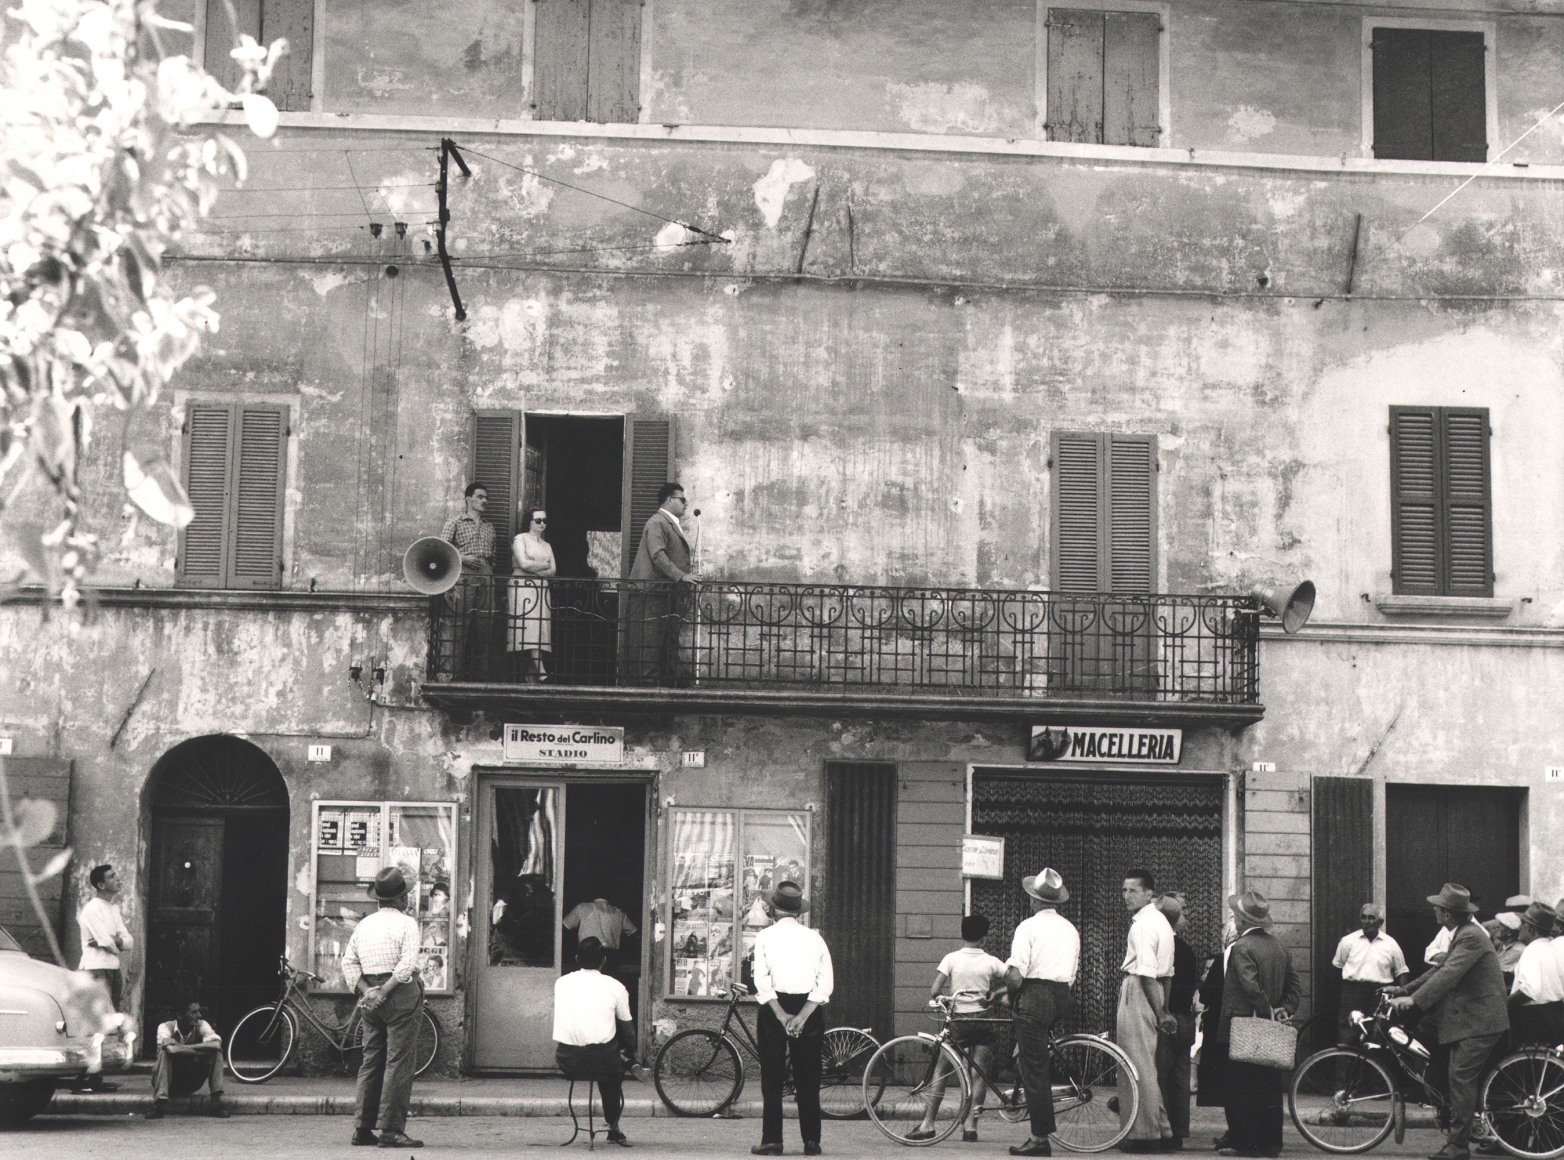 Nino Migliori, Meeting in the Province, 1957. People gather in the street as a man speaks into a microphone from a balcony.